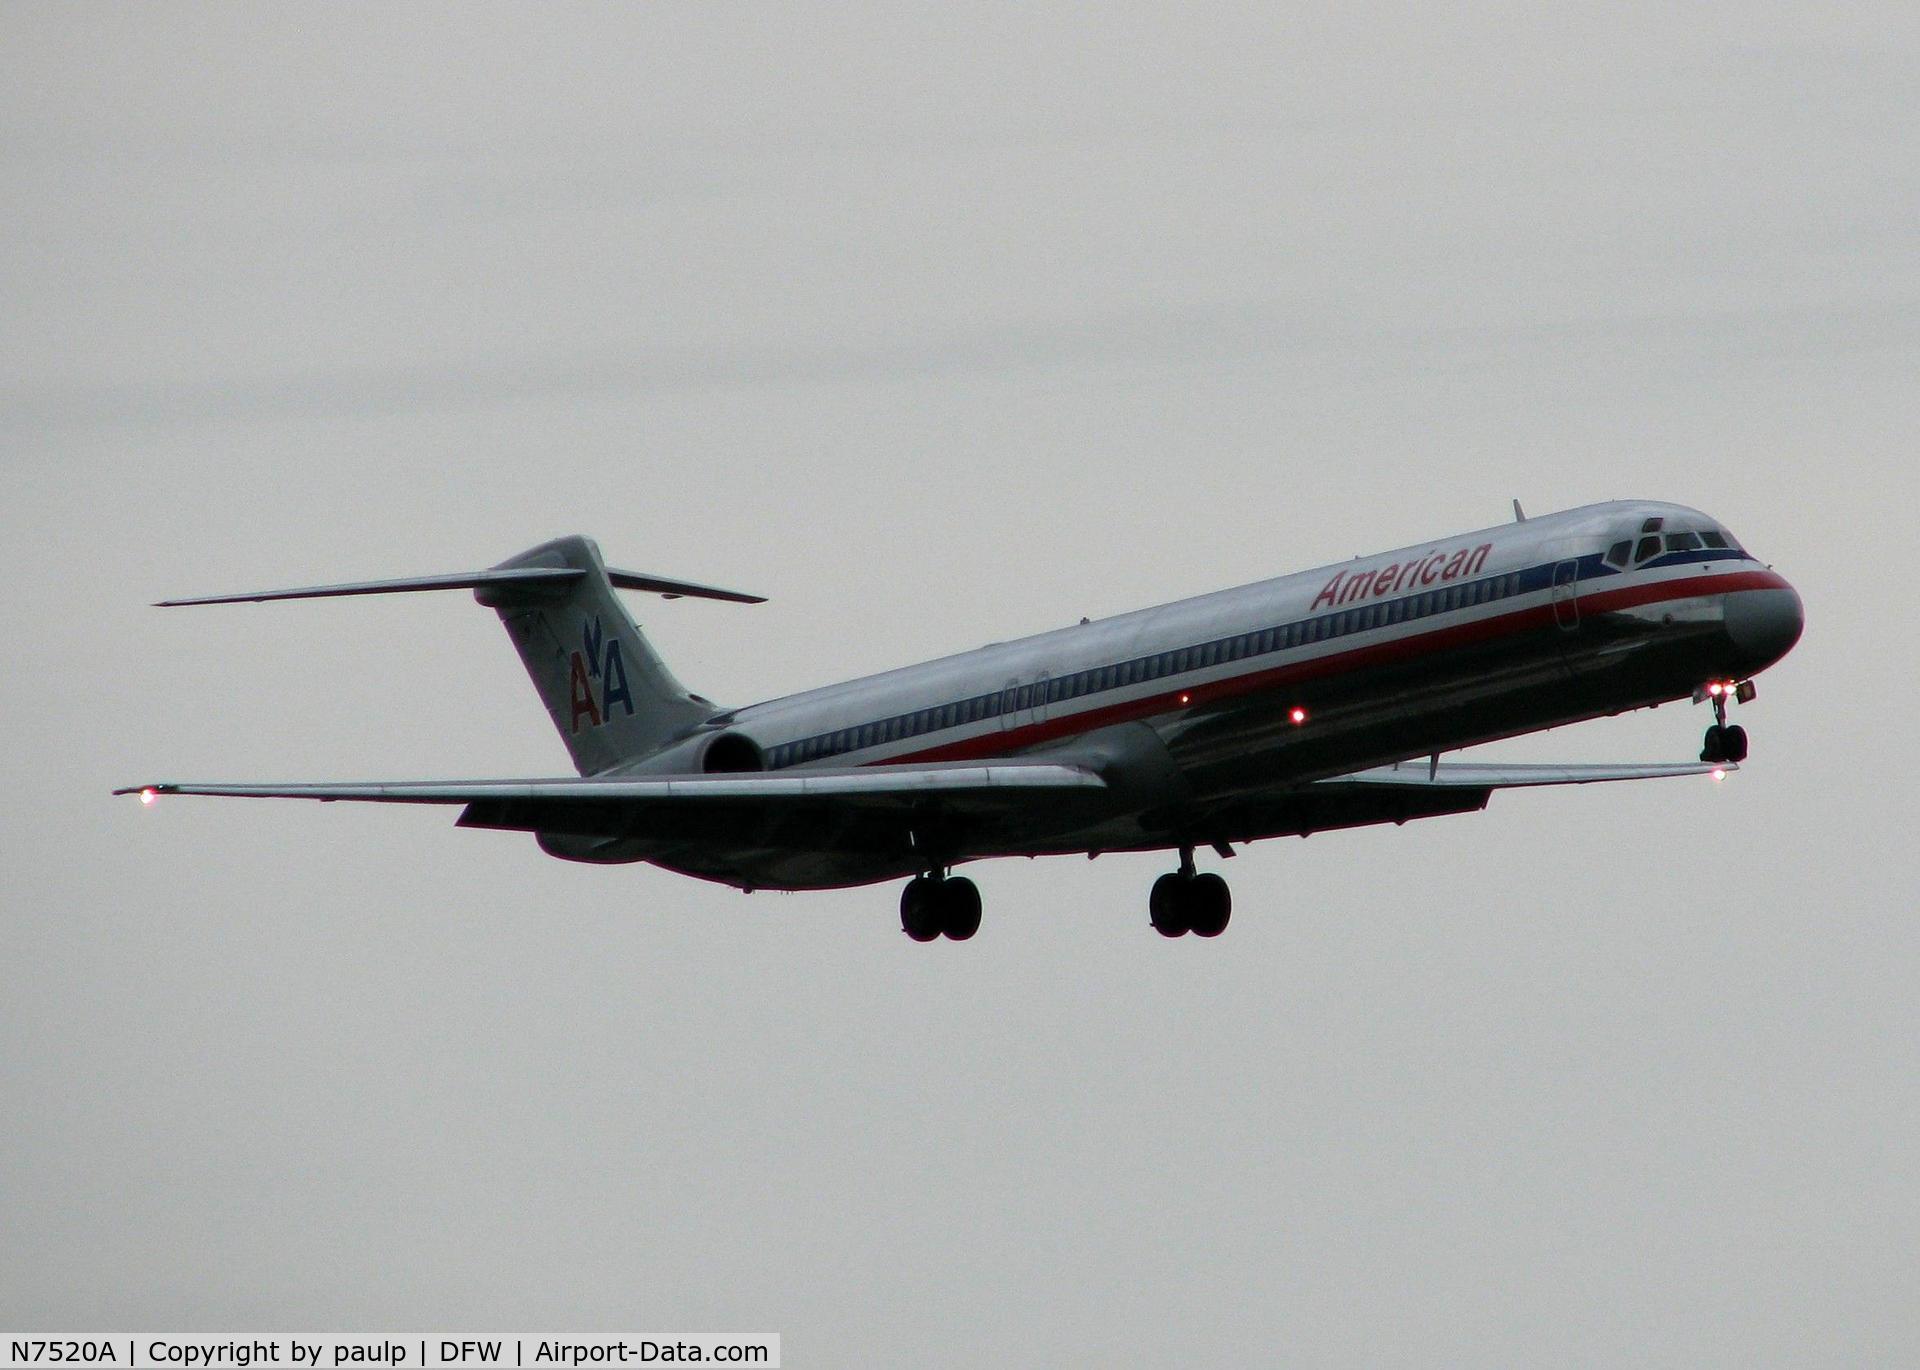 N7520A, 1990 McDonnell Douglas MD-82 (DC-9-82) C/N 49897, Landing at DFW. A nasty, rainy day!